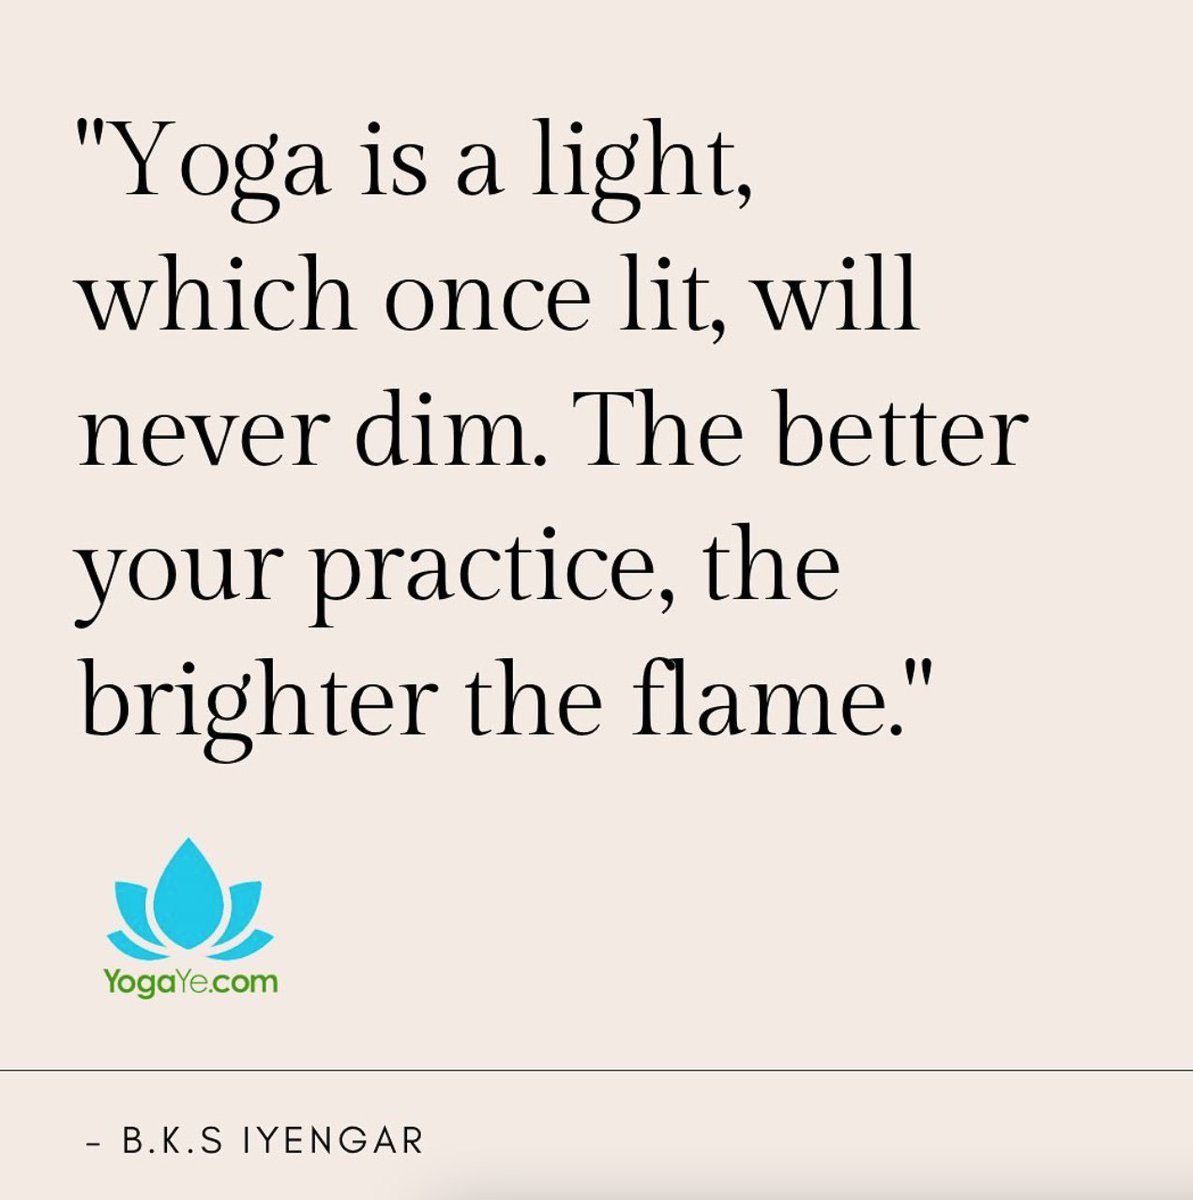 Enjoy the process, embrace yoga. 📷 Take the time to immerse yourself in the beauty of your practice. 

At #YogaYe we believe true fulfillment comes from savoring each moment and finding joy in the journey. 

#yogaquote #quoteoftheday  #EnjoyTheProcess #YogaYe